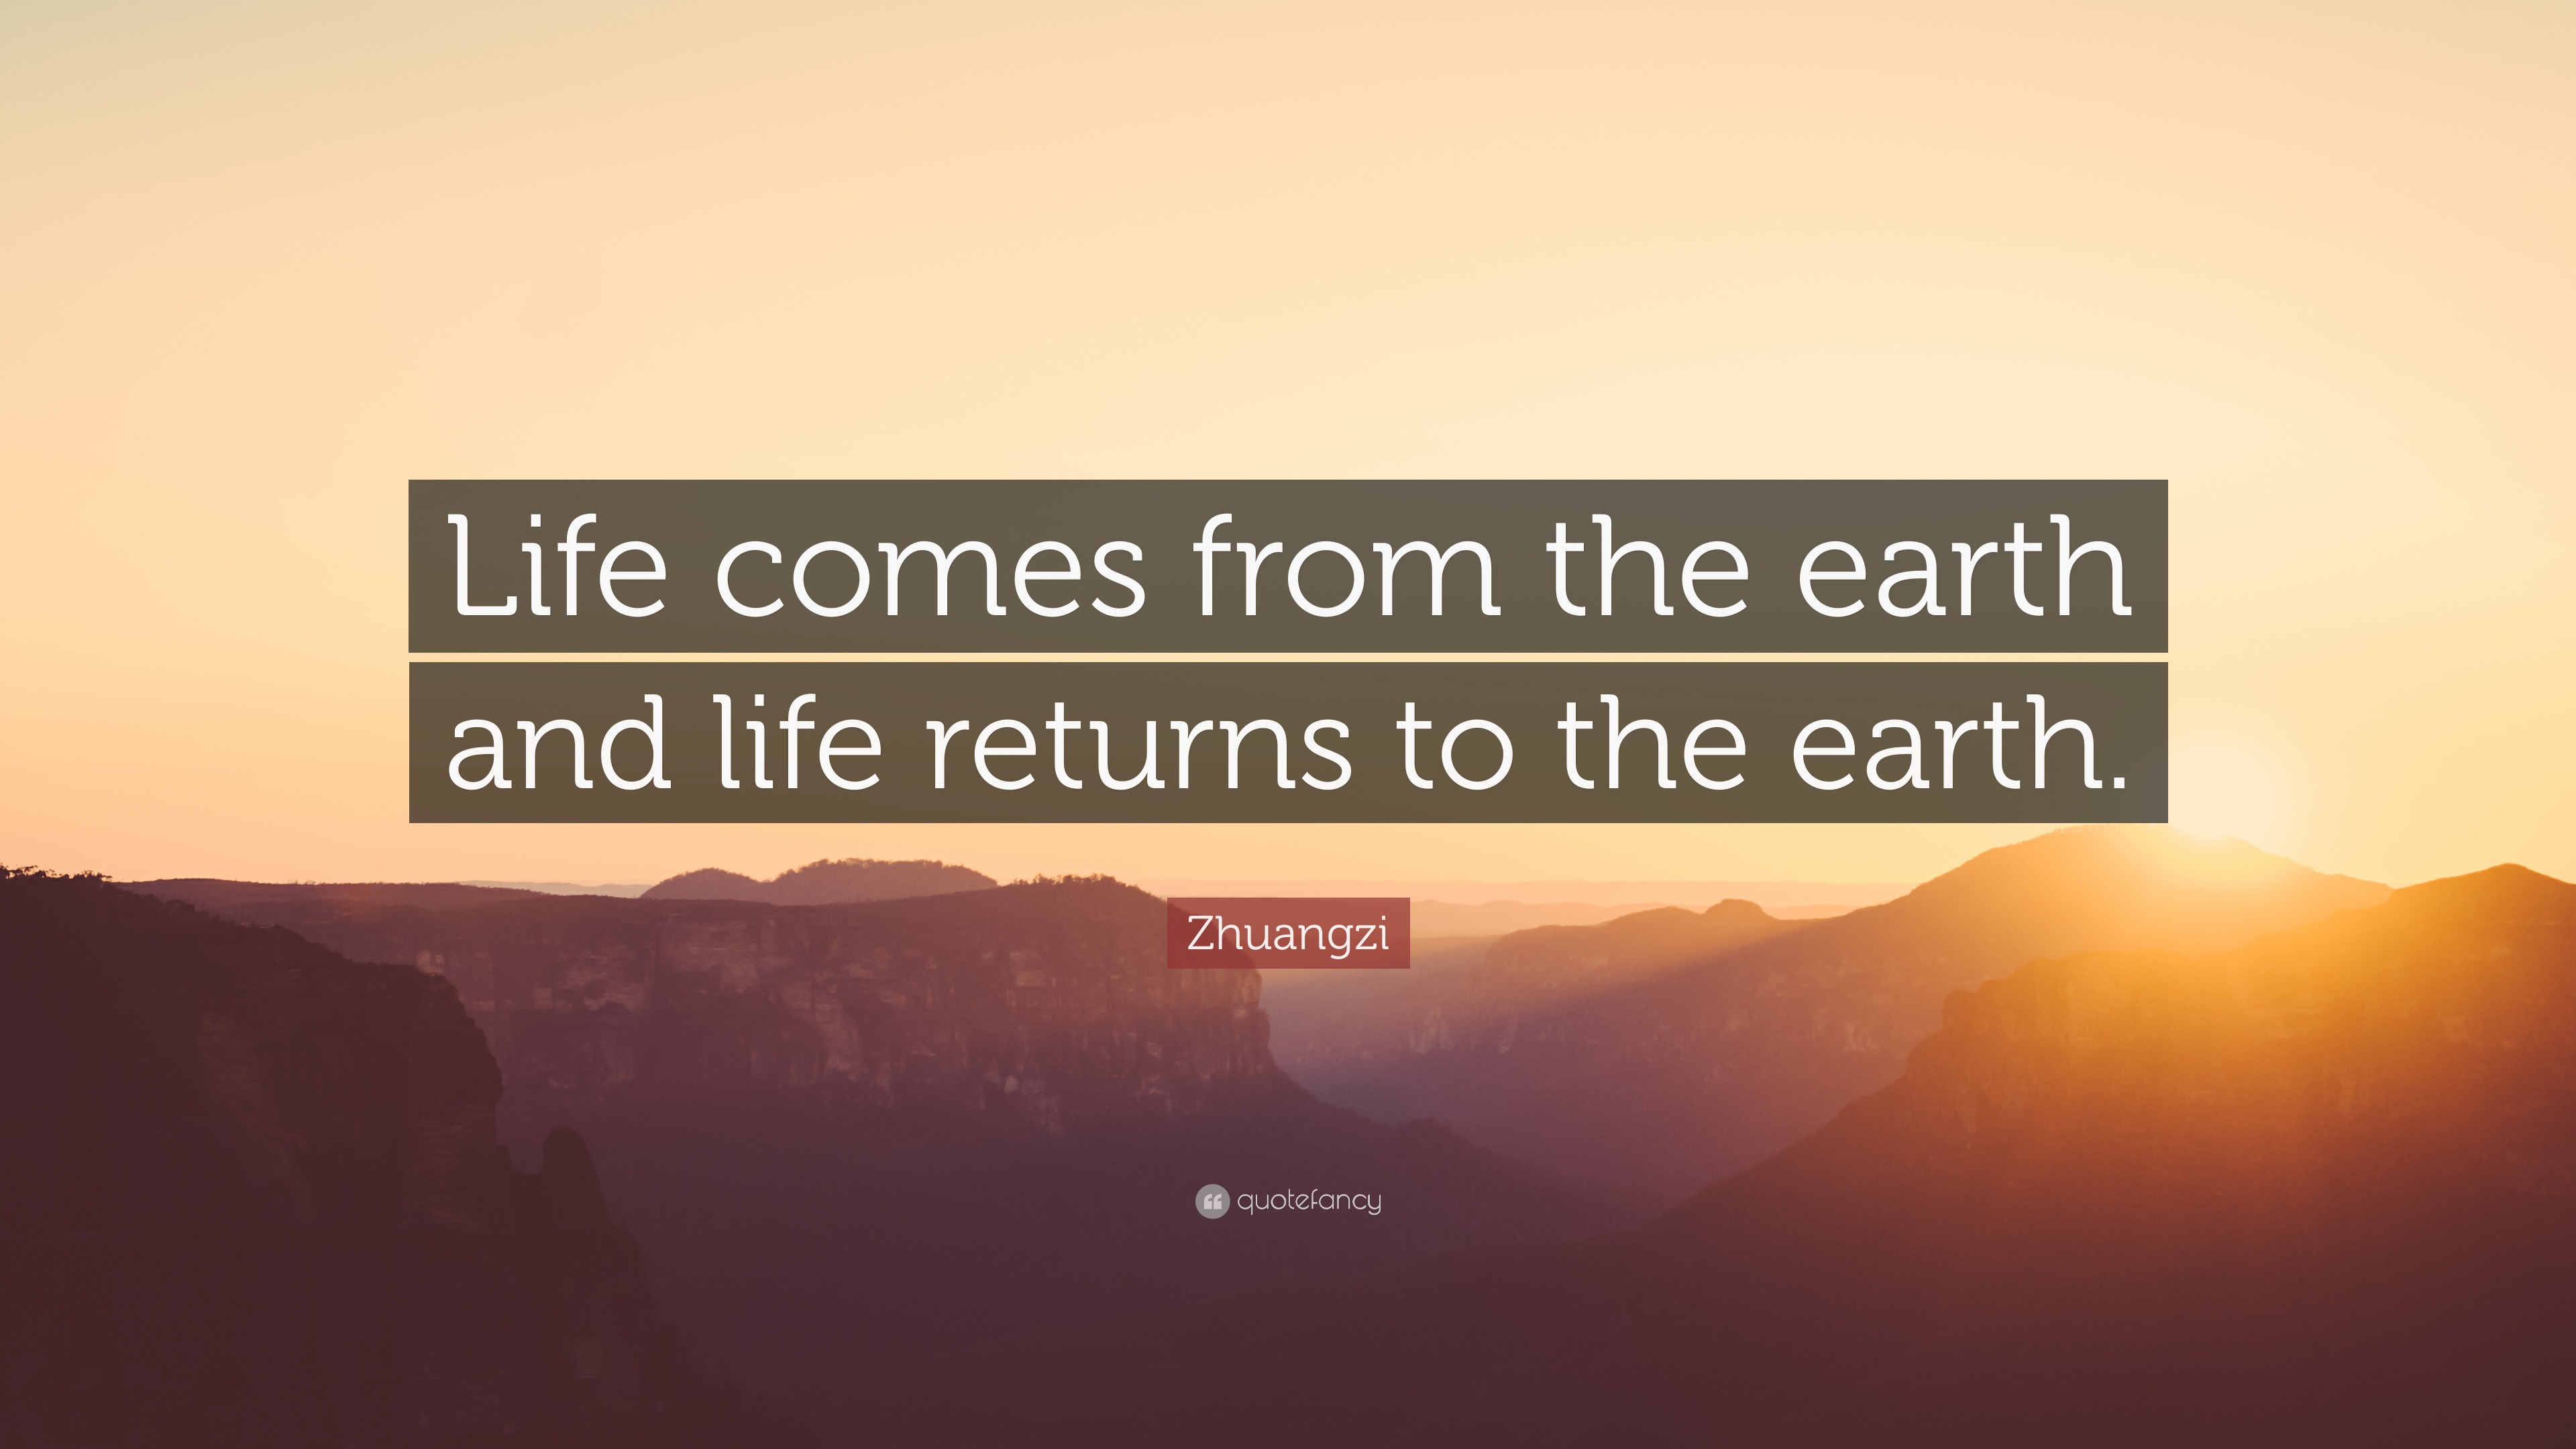 Zhuangzi Quote: “Life comes from the earth and life returns to the earth.”